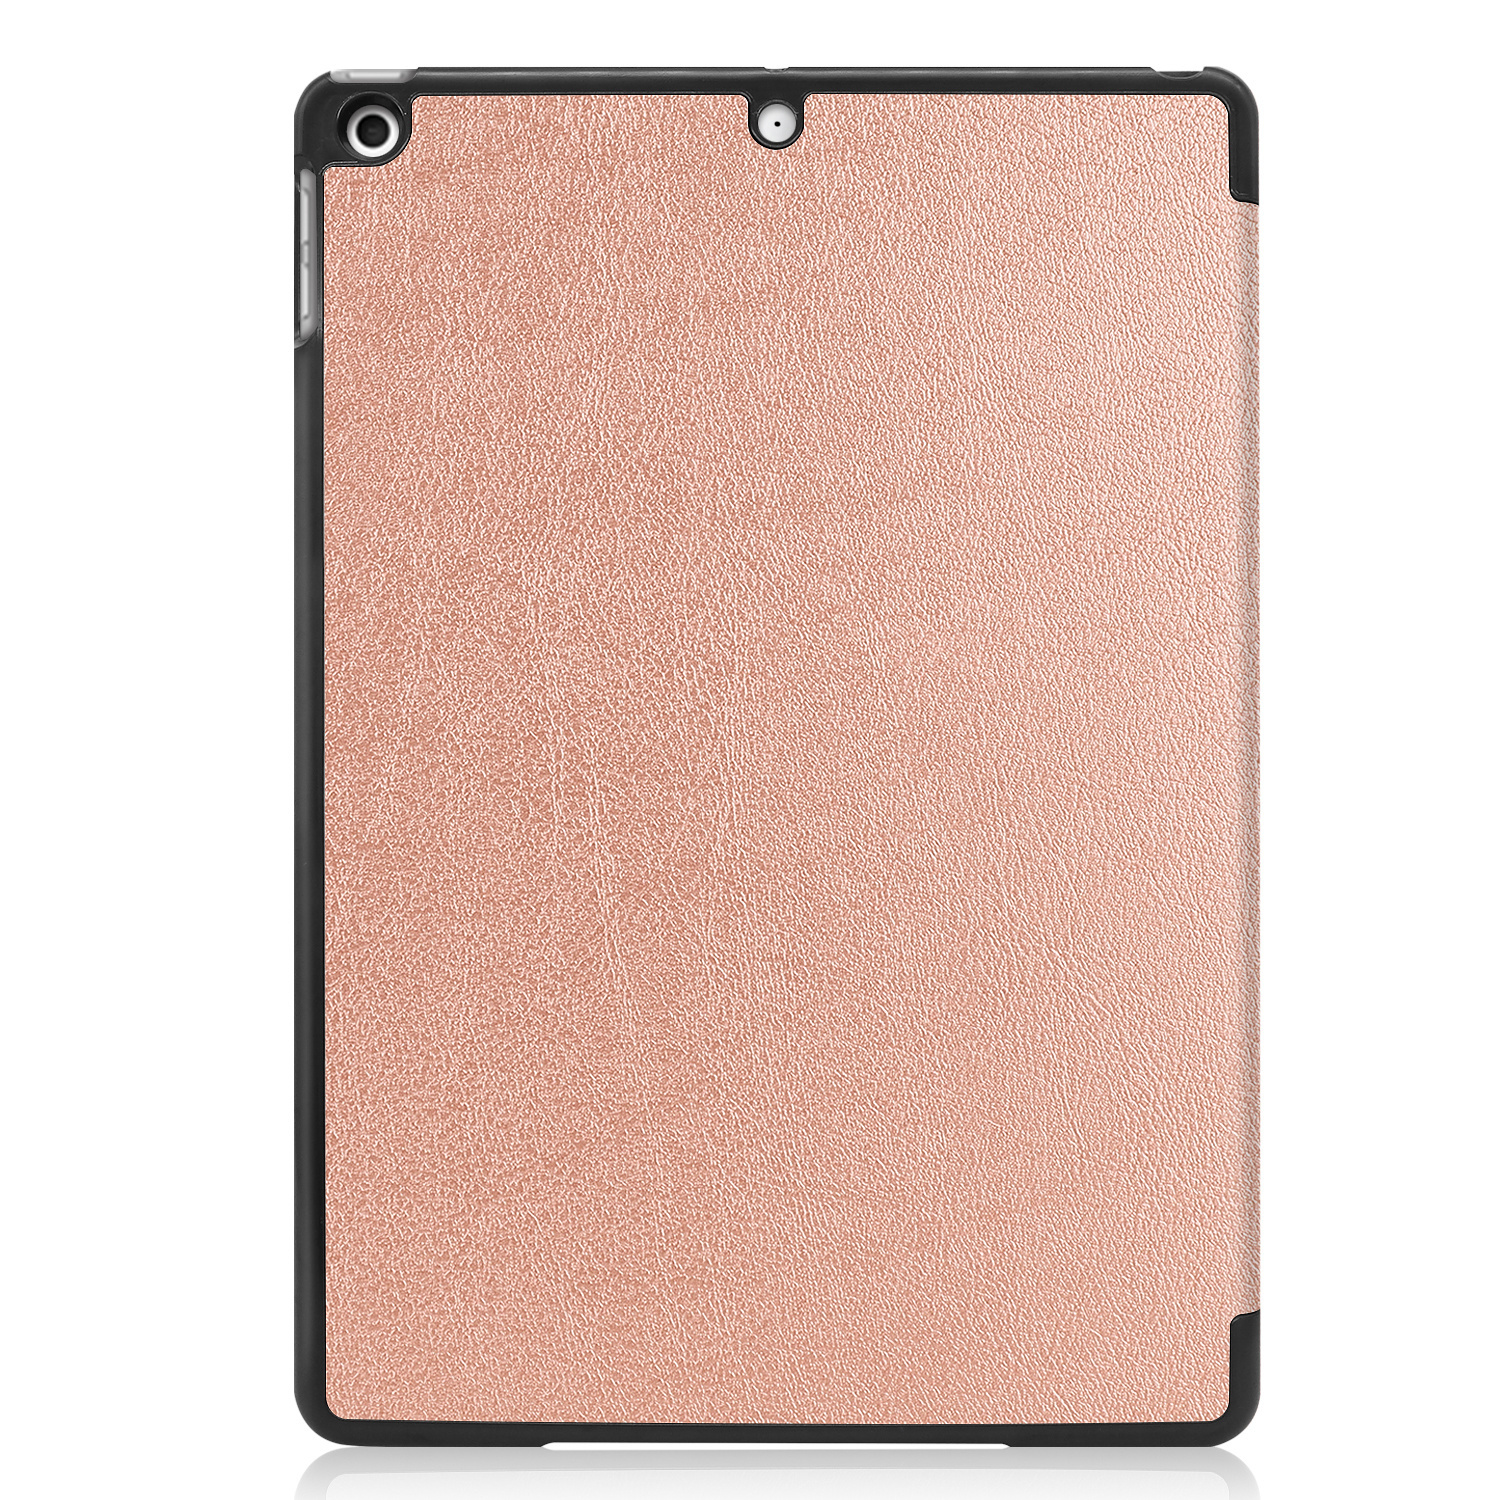 Nomfy iPad 10.2 2019 Hoesje Book Case Hoes - iPad 10.2 2019 Hoes Hardcover Case Hoesje - Rose Goud